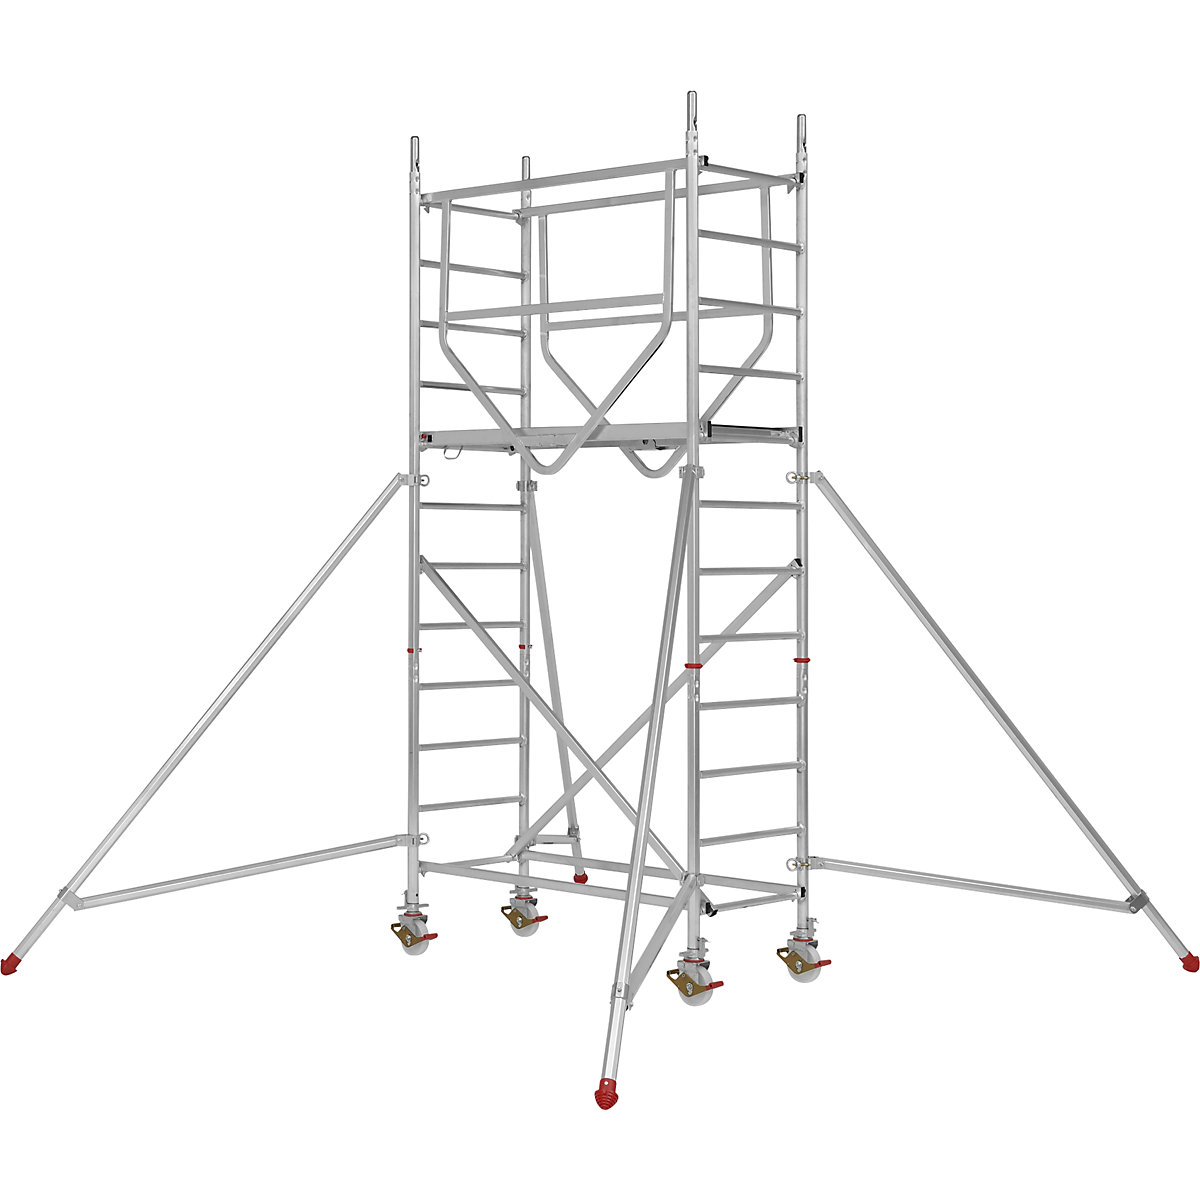 ADVANCED SAFE-T 7070 mobile access tower – HYMER, welded, platform 1.58 x 0.61 m, module 1+kit-set of stabilising arms-3